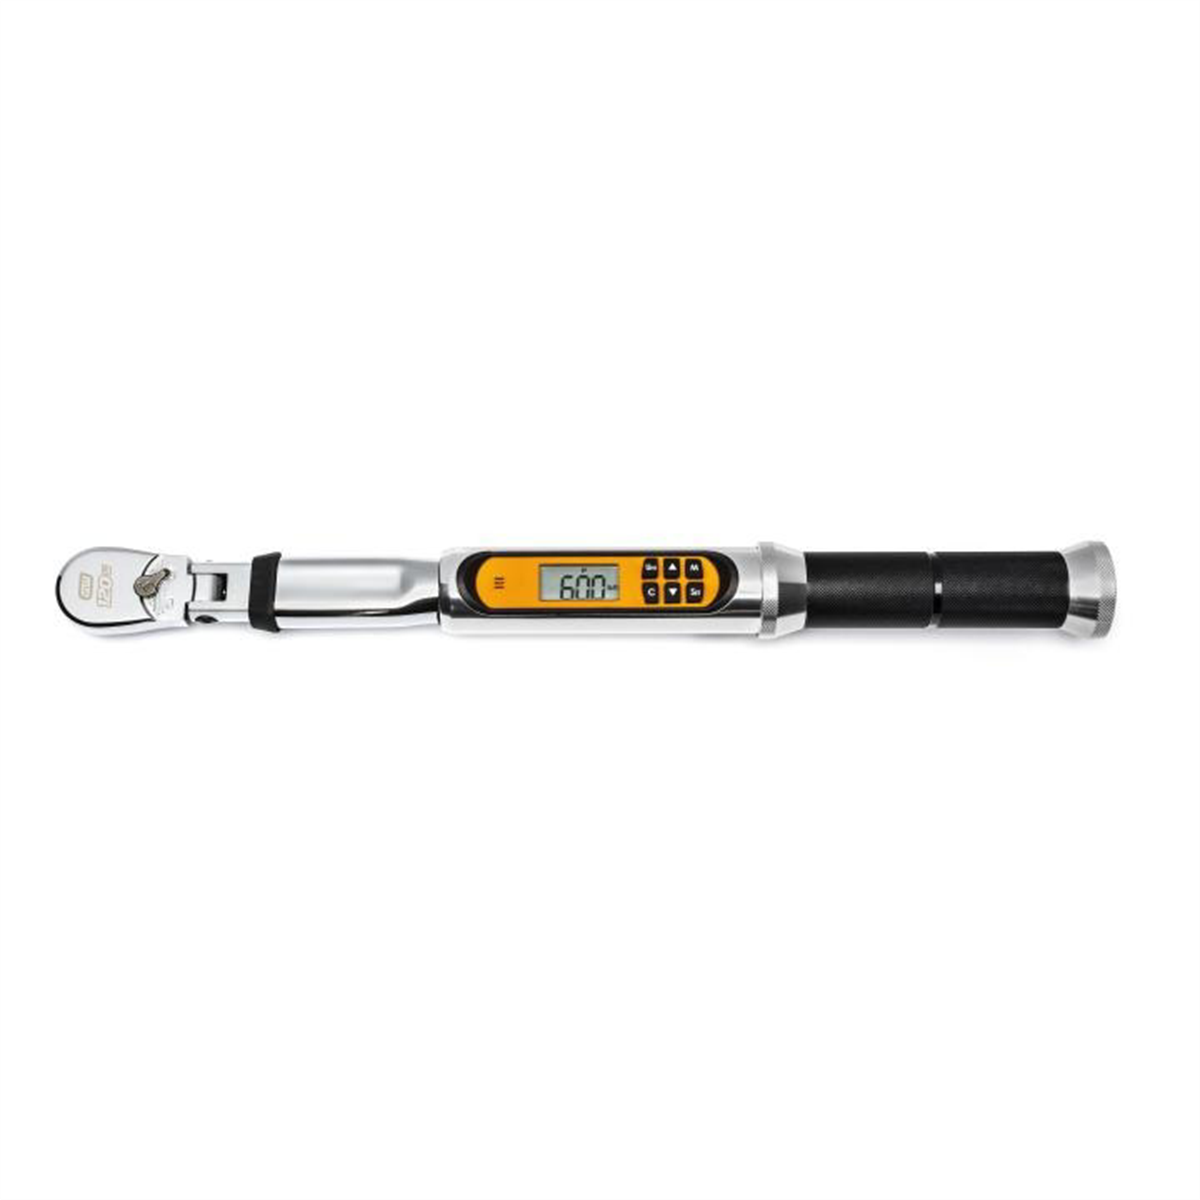 3/8" Dr. 120XP Micrometer Torque Wrench with Angle 10-100FT/LB